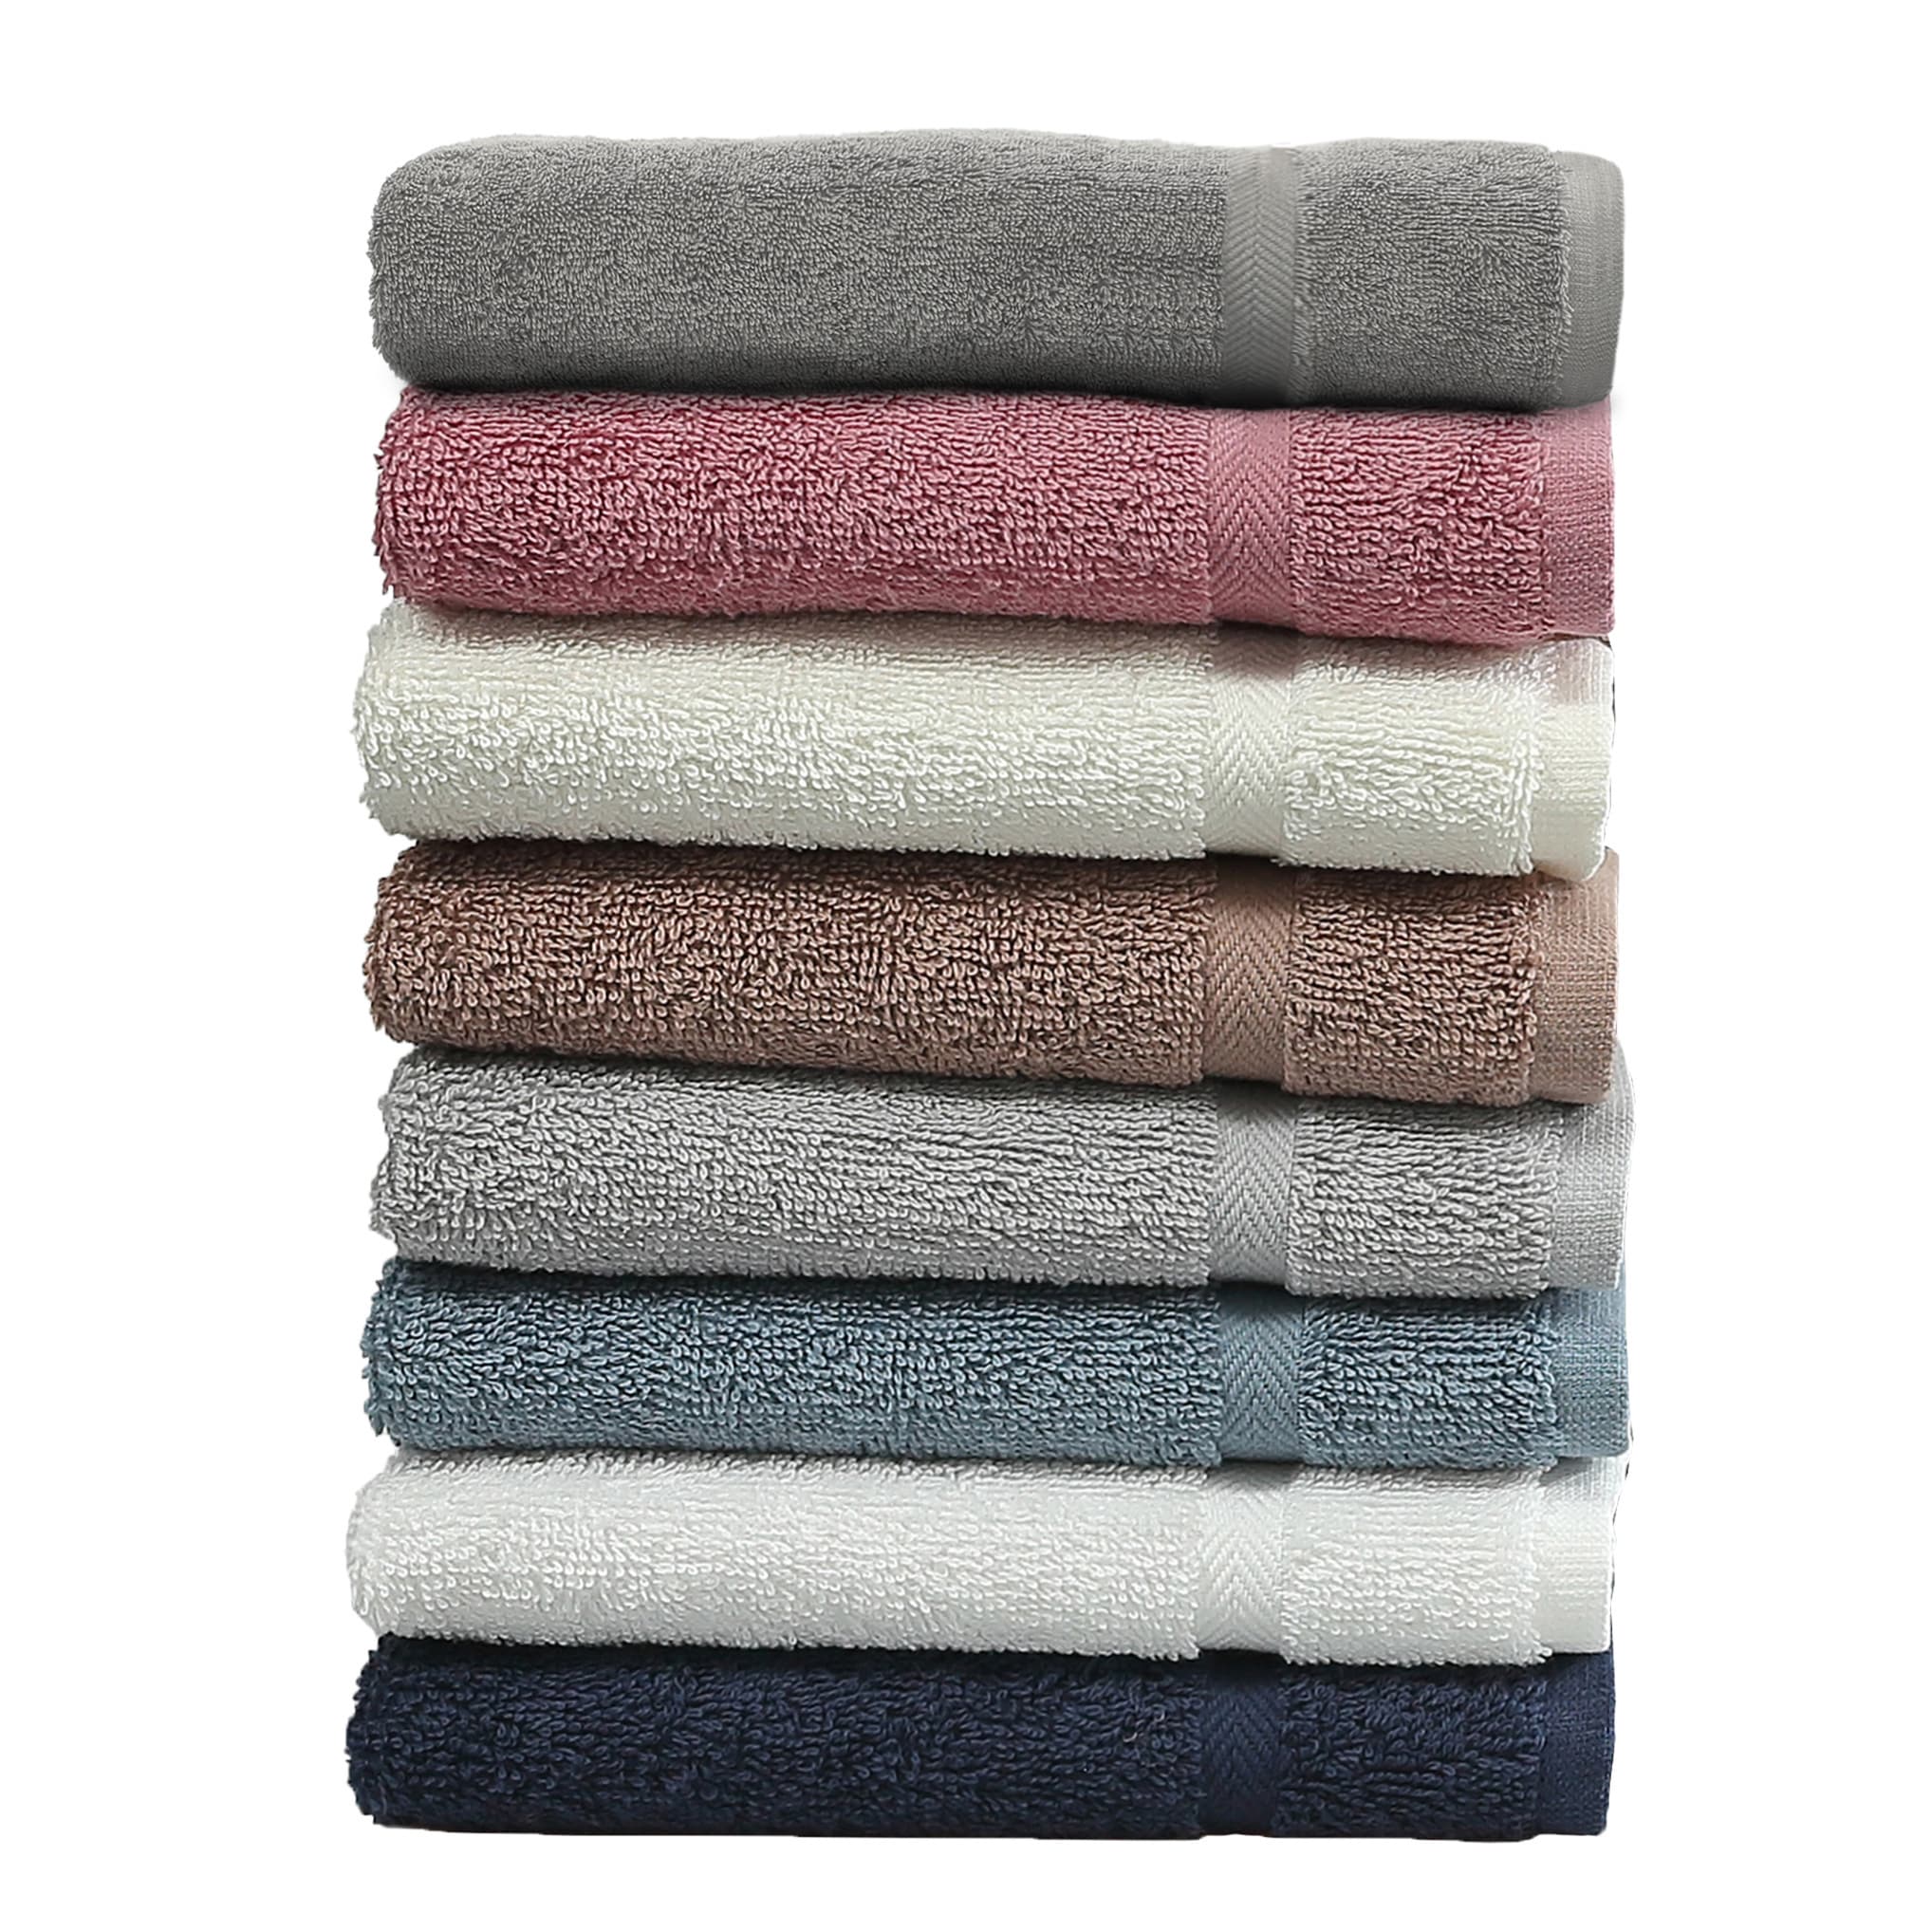 https://ak1.ostkcdn.com/images/products/11090783/Authentic-Hotel-and-Spa-Omni-Turkish-Cotton-Terry-Washcloths-Set-of-6-f3dc8982-e104-4d0f-a15c-b45486d030a4.jpg